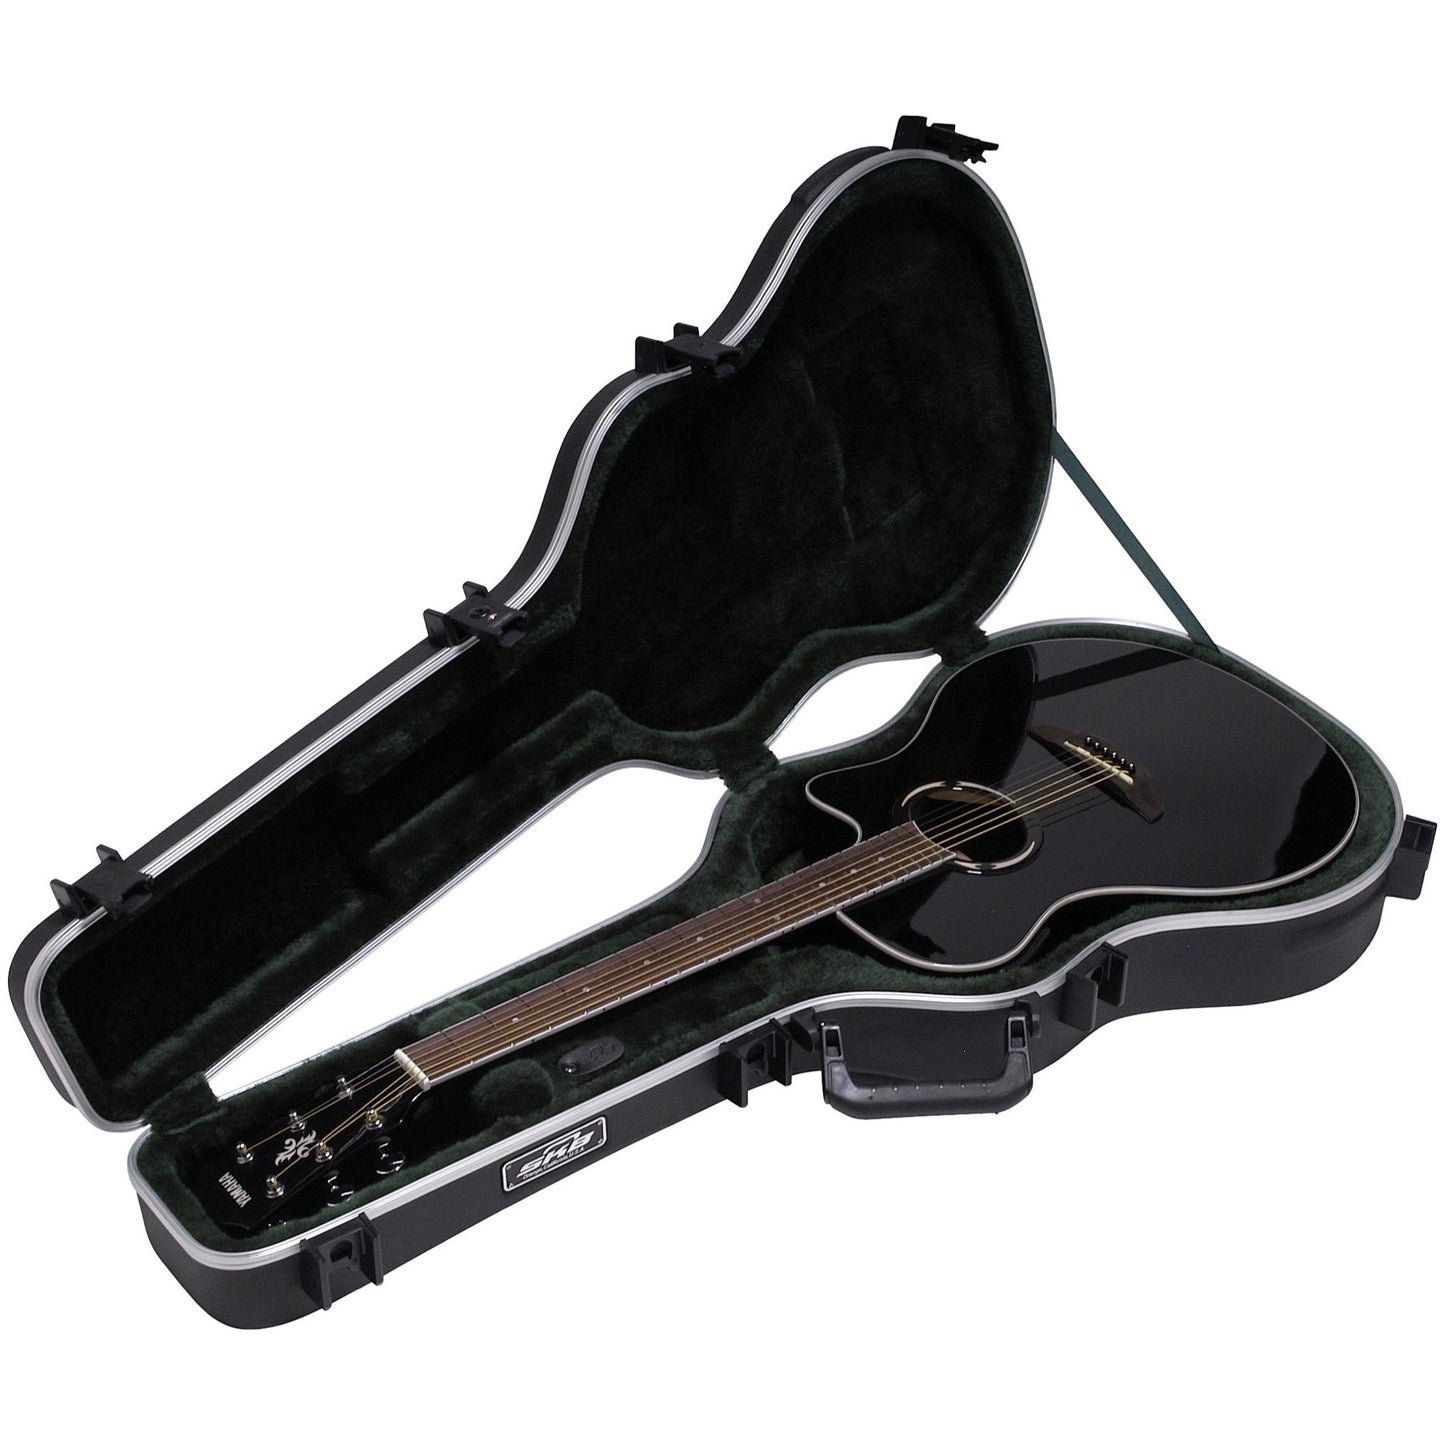 SKB 30 Molded Hardshell Case for Classical Guitar, 2007 Version With Trigger Latches